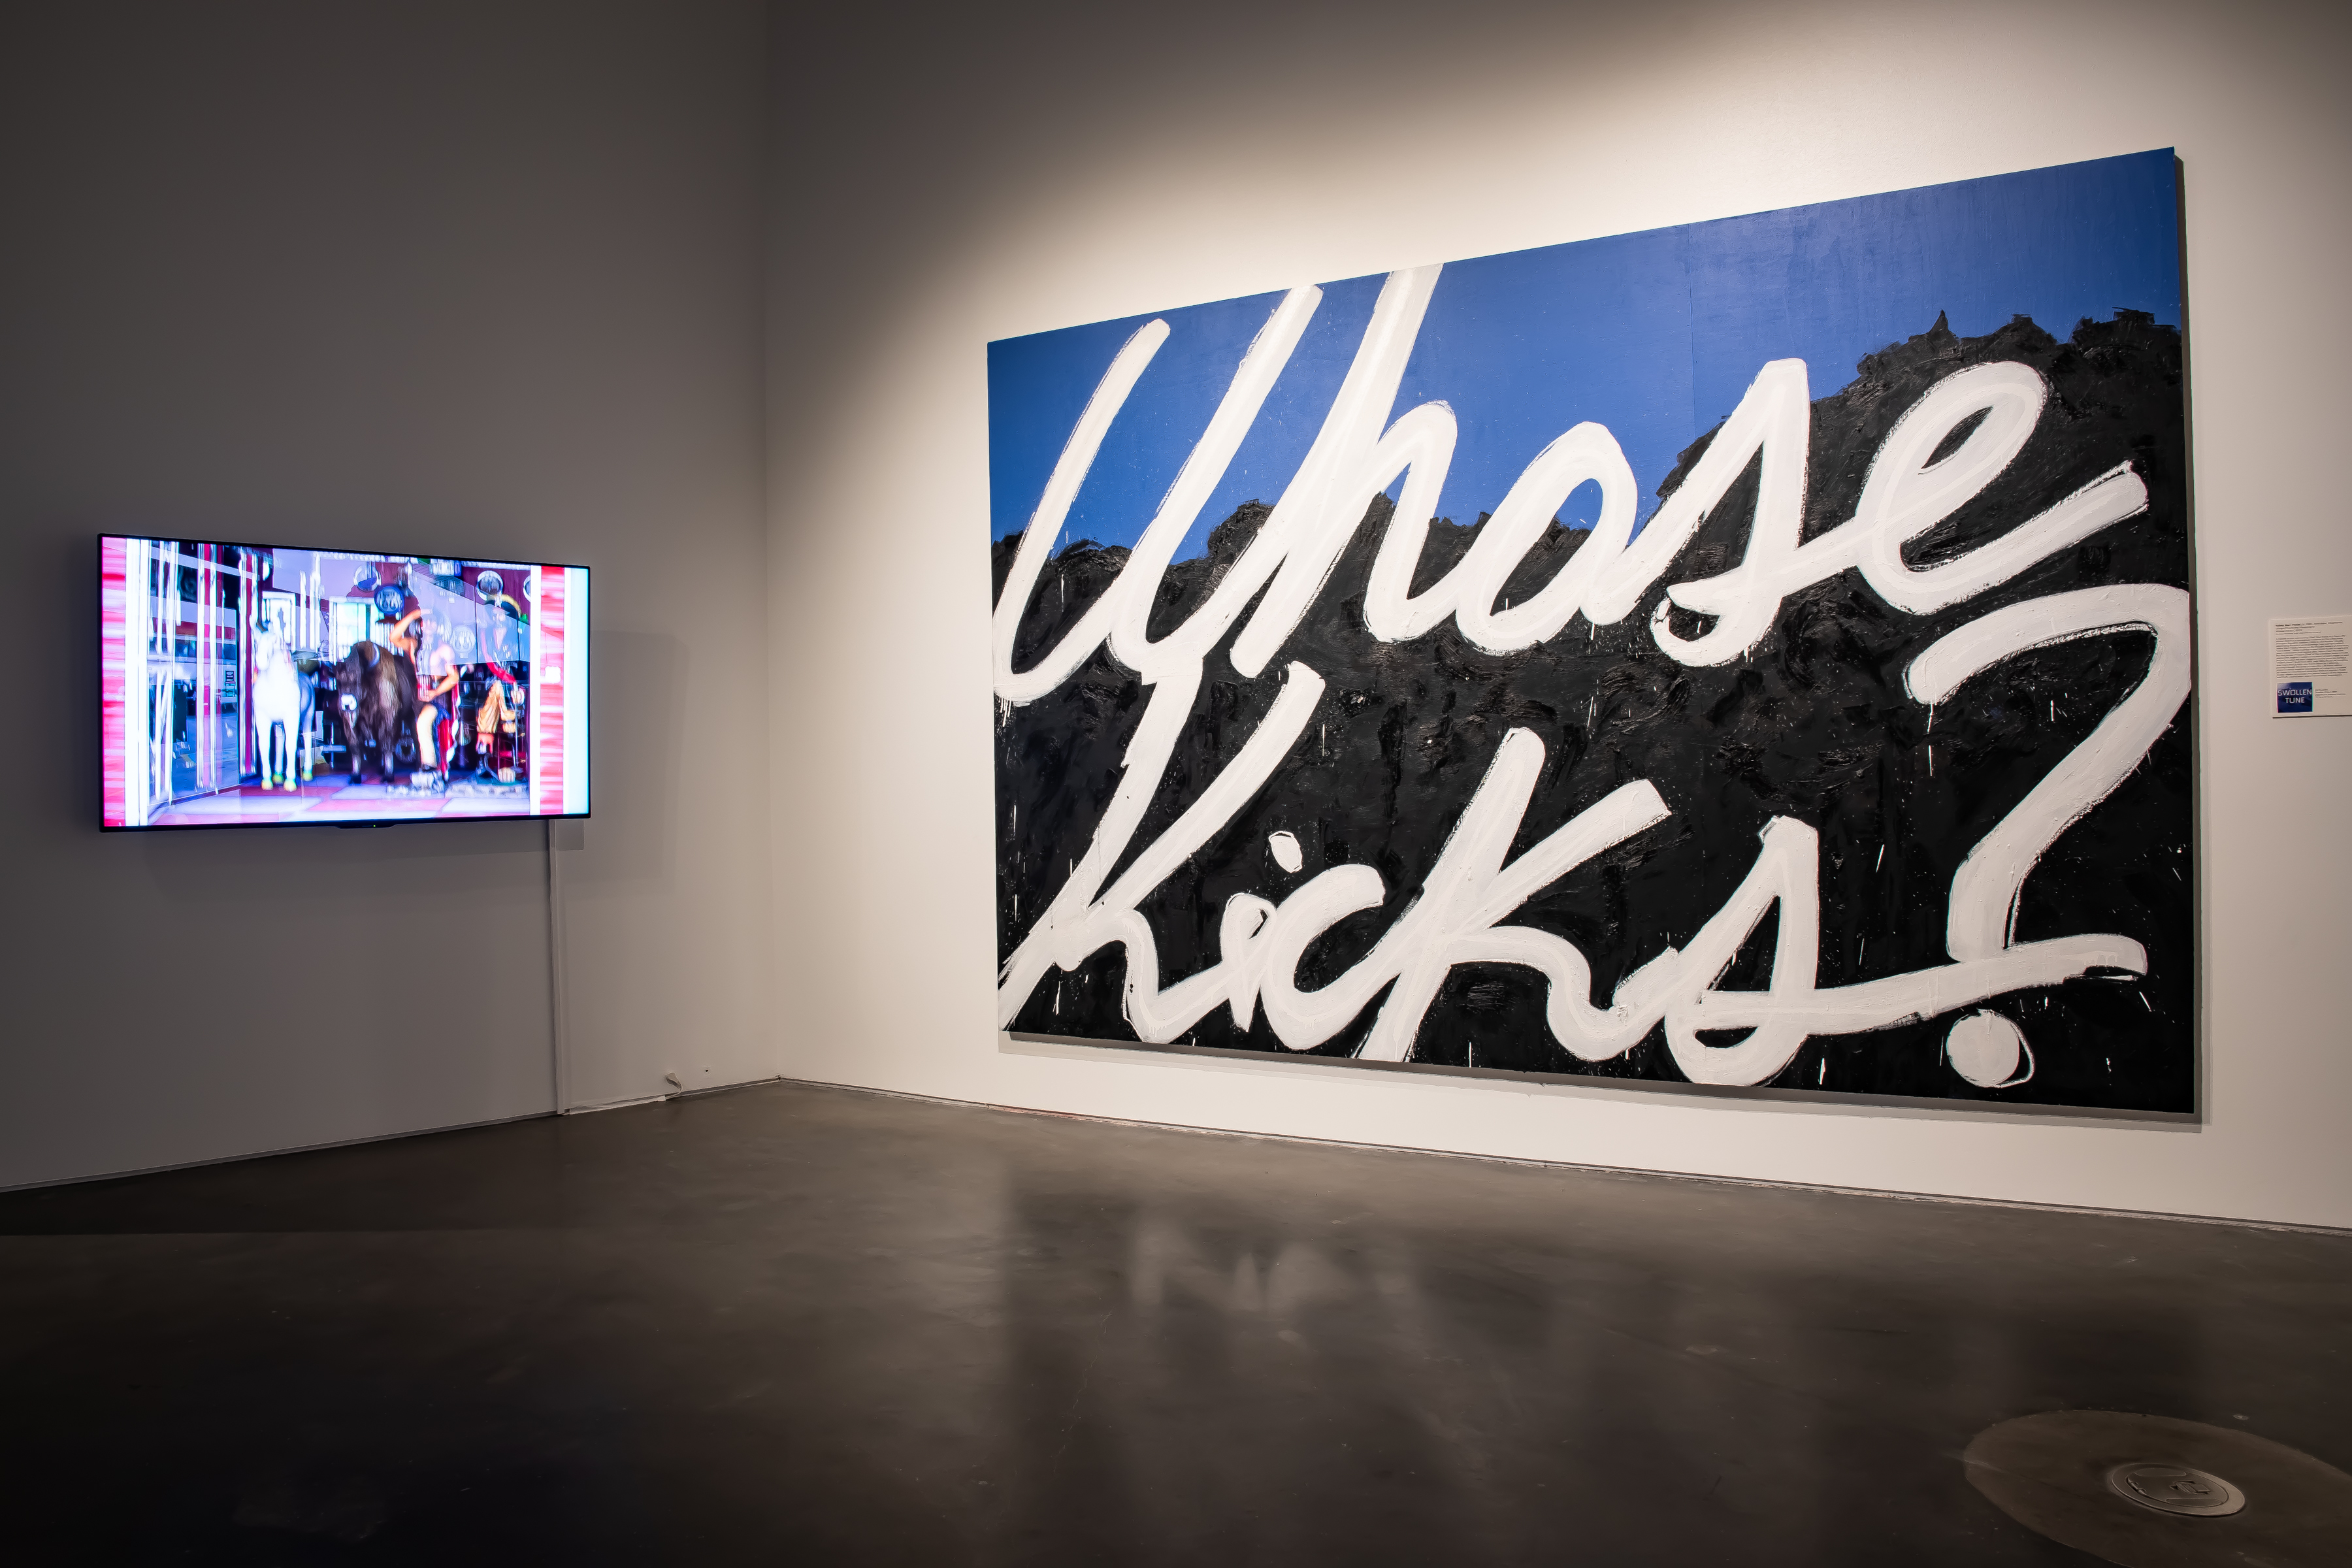 Two works of art hang on a white gallery wall. Left: A video work on a TV. Right: A large blue and black mural with the words WHOSE KICKS? painted in white in the center.